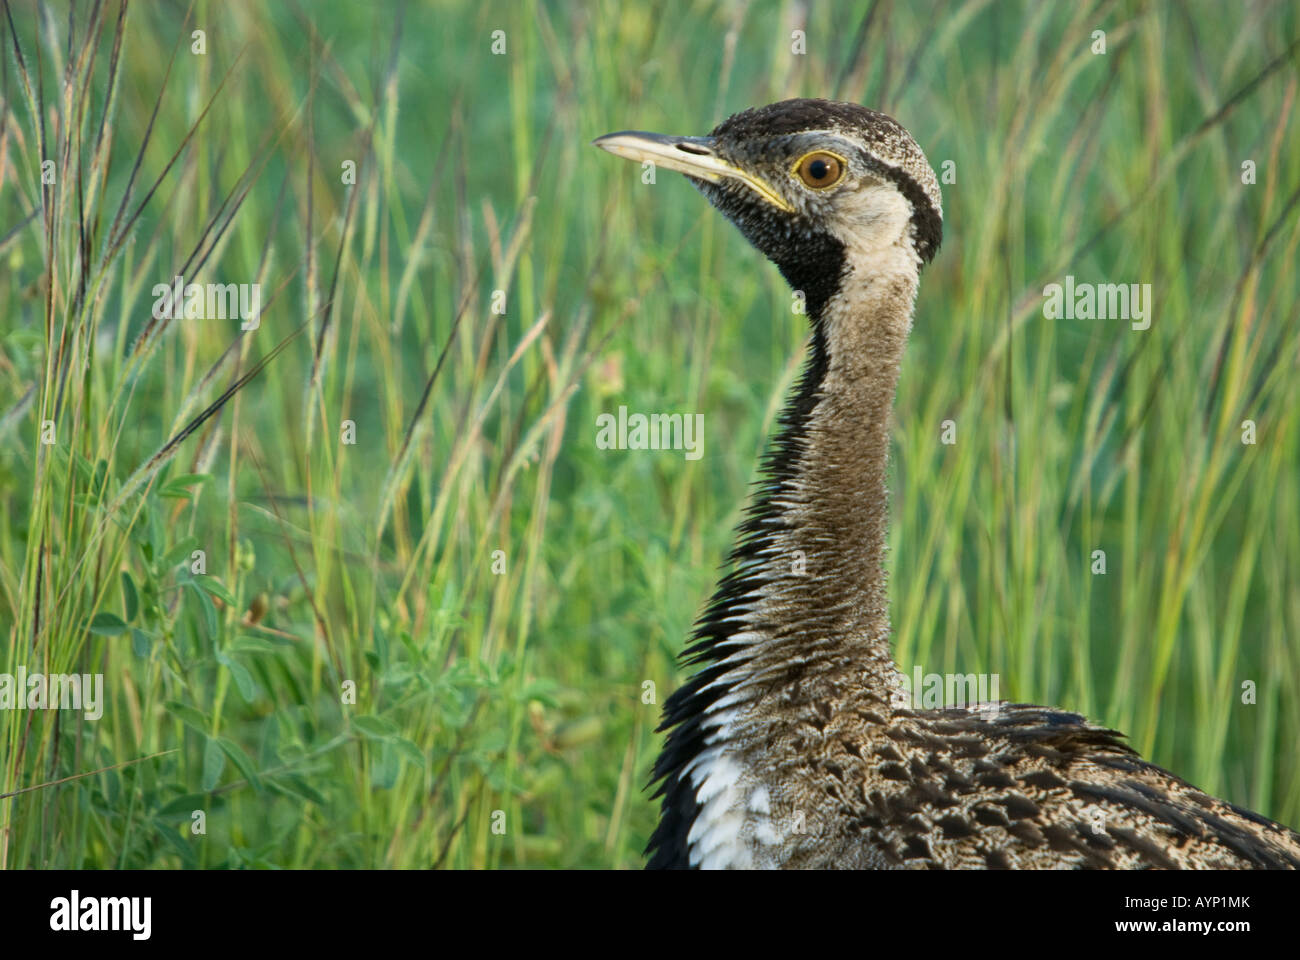 A korhaan standing in the grass Stock Photo